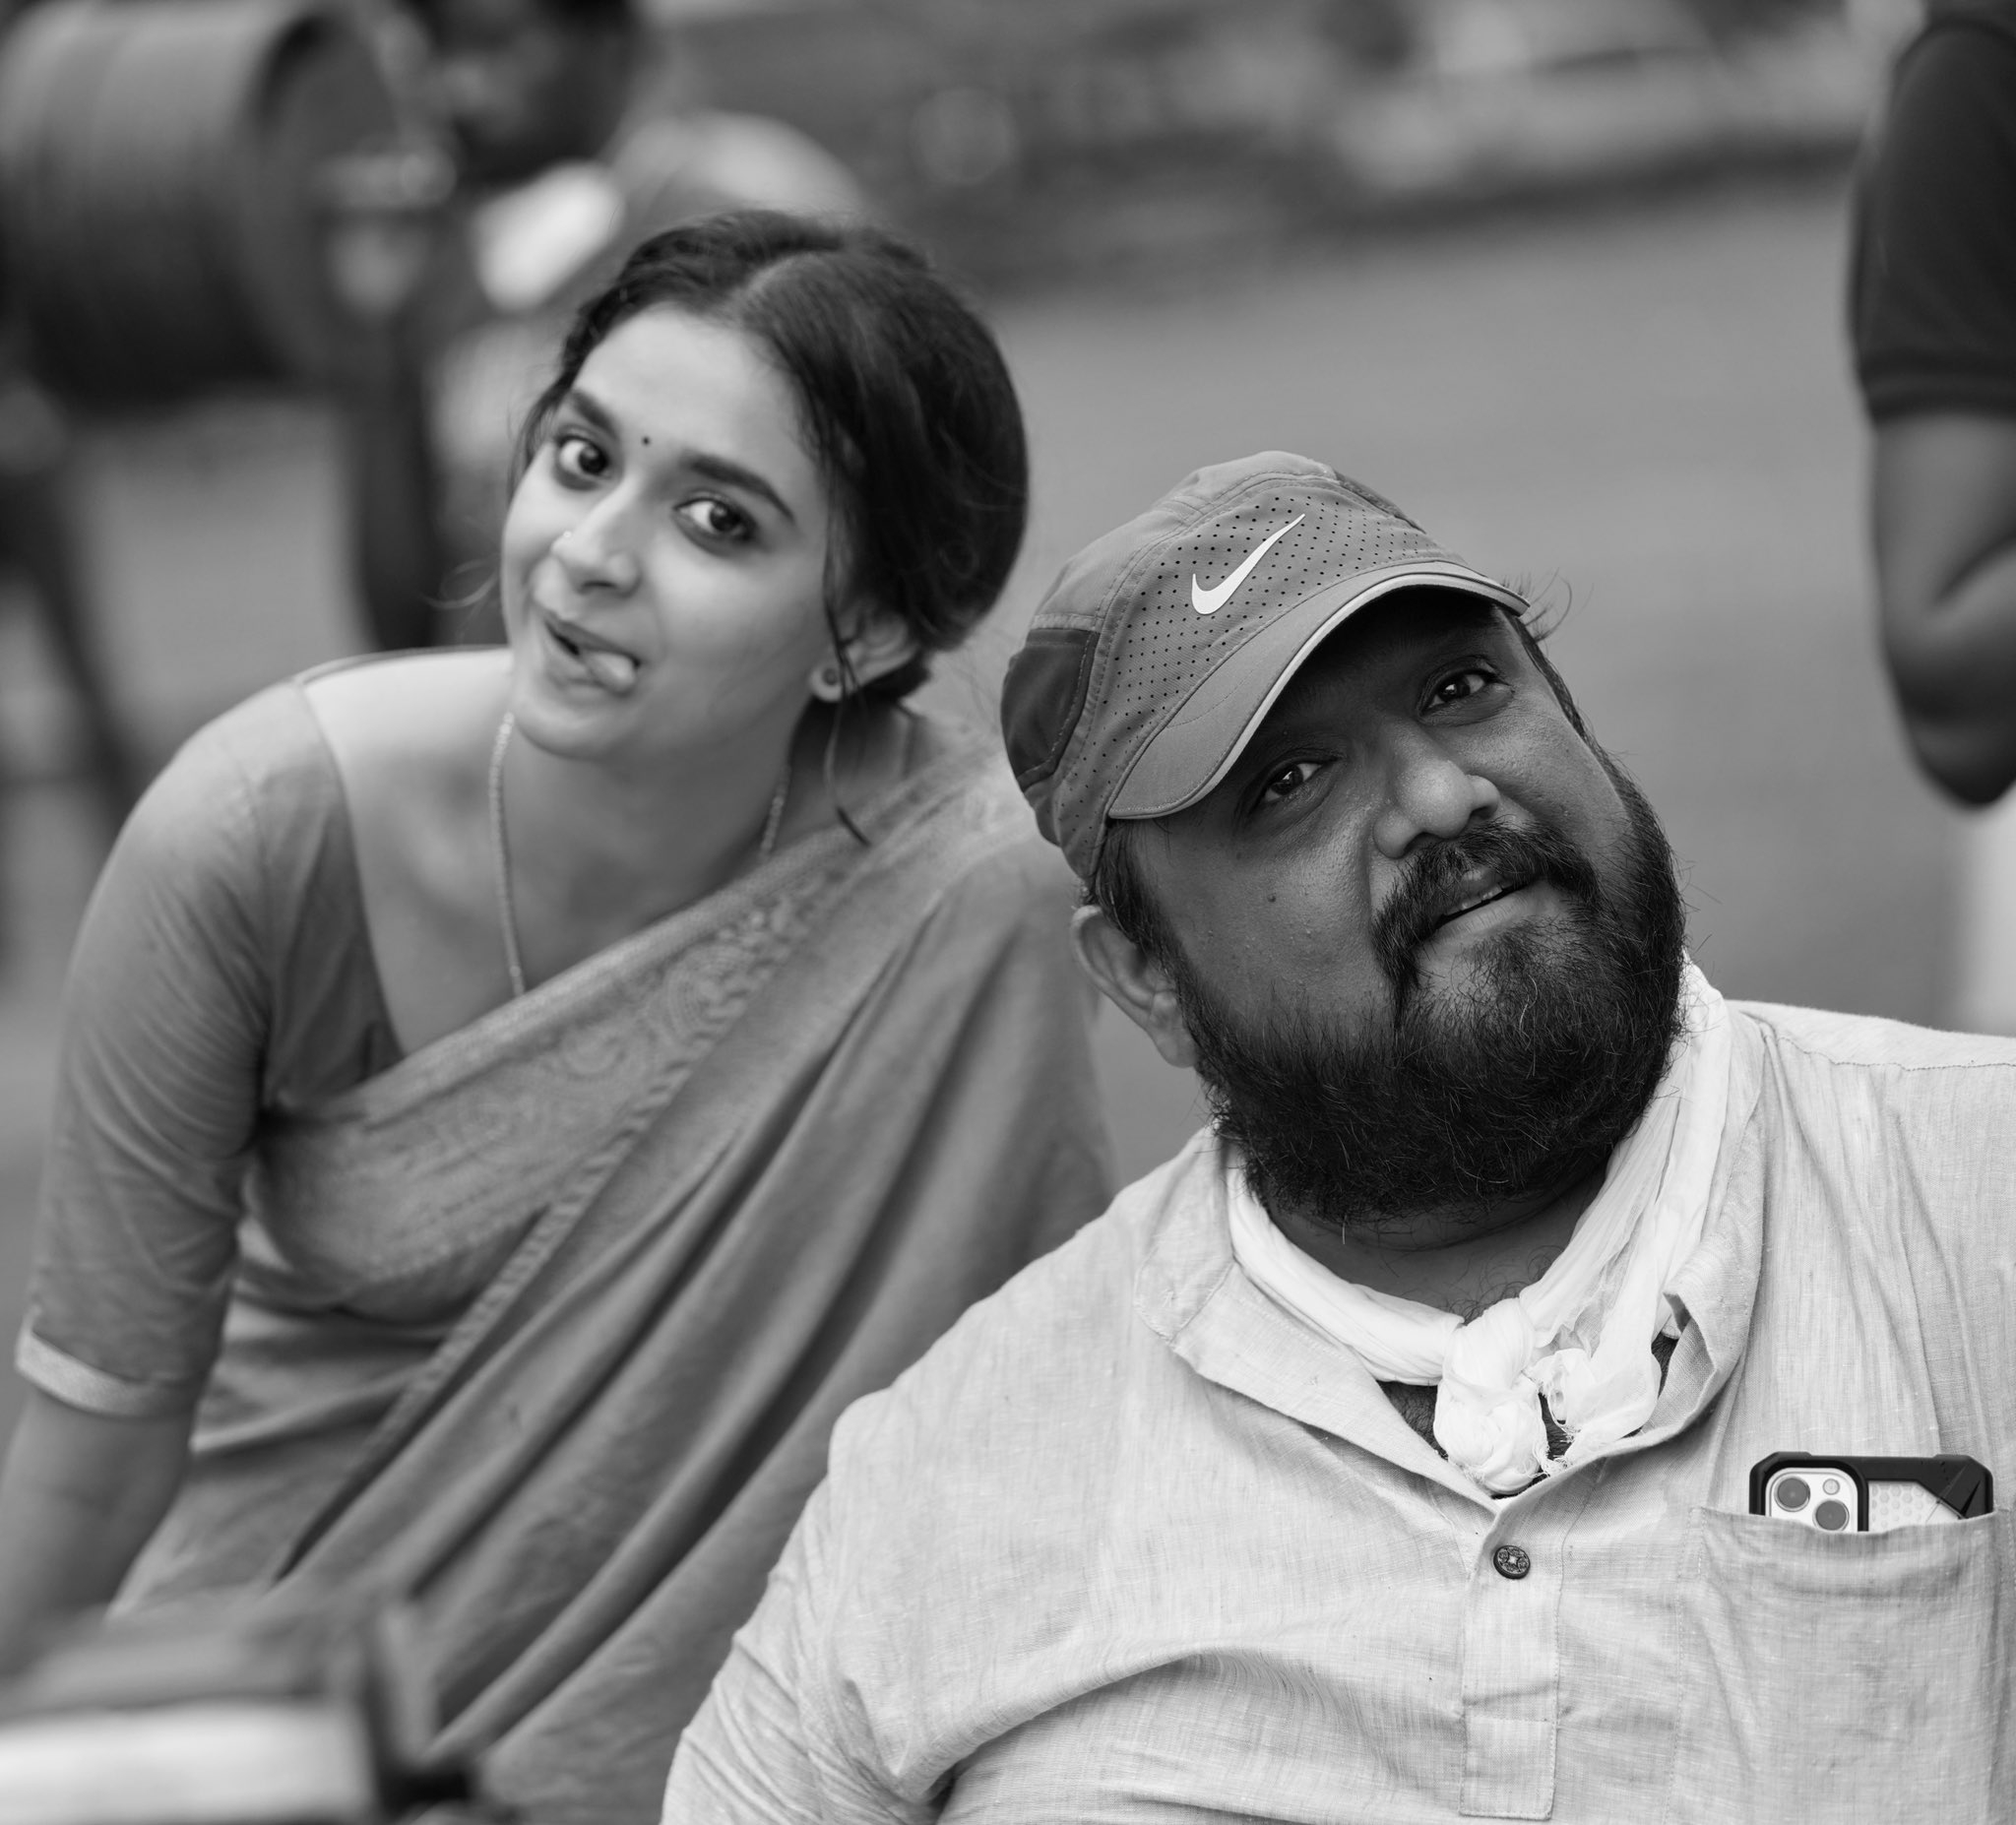 annaththe movie BTS picture went viral on social media